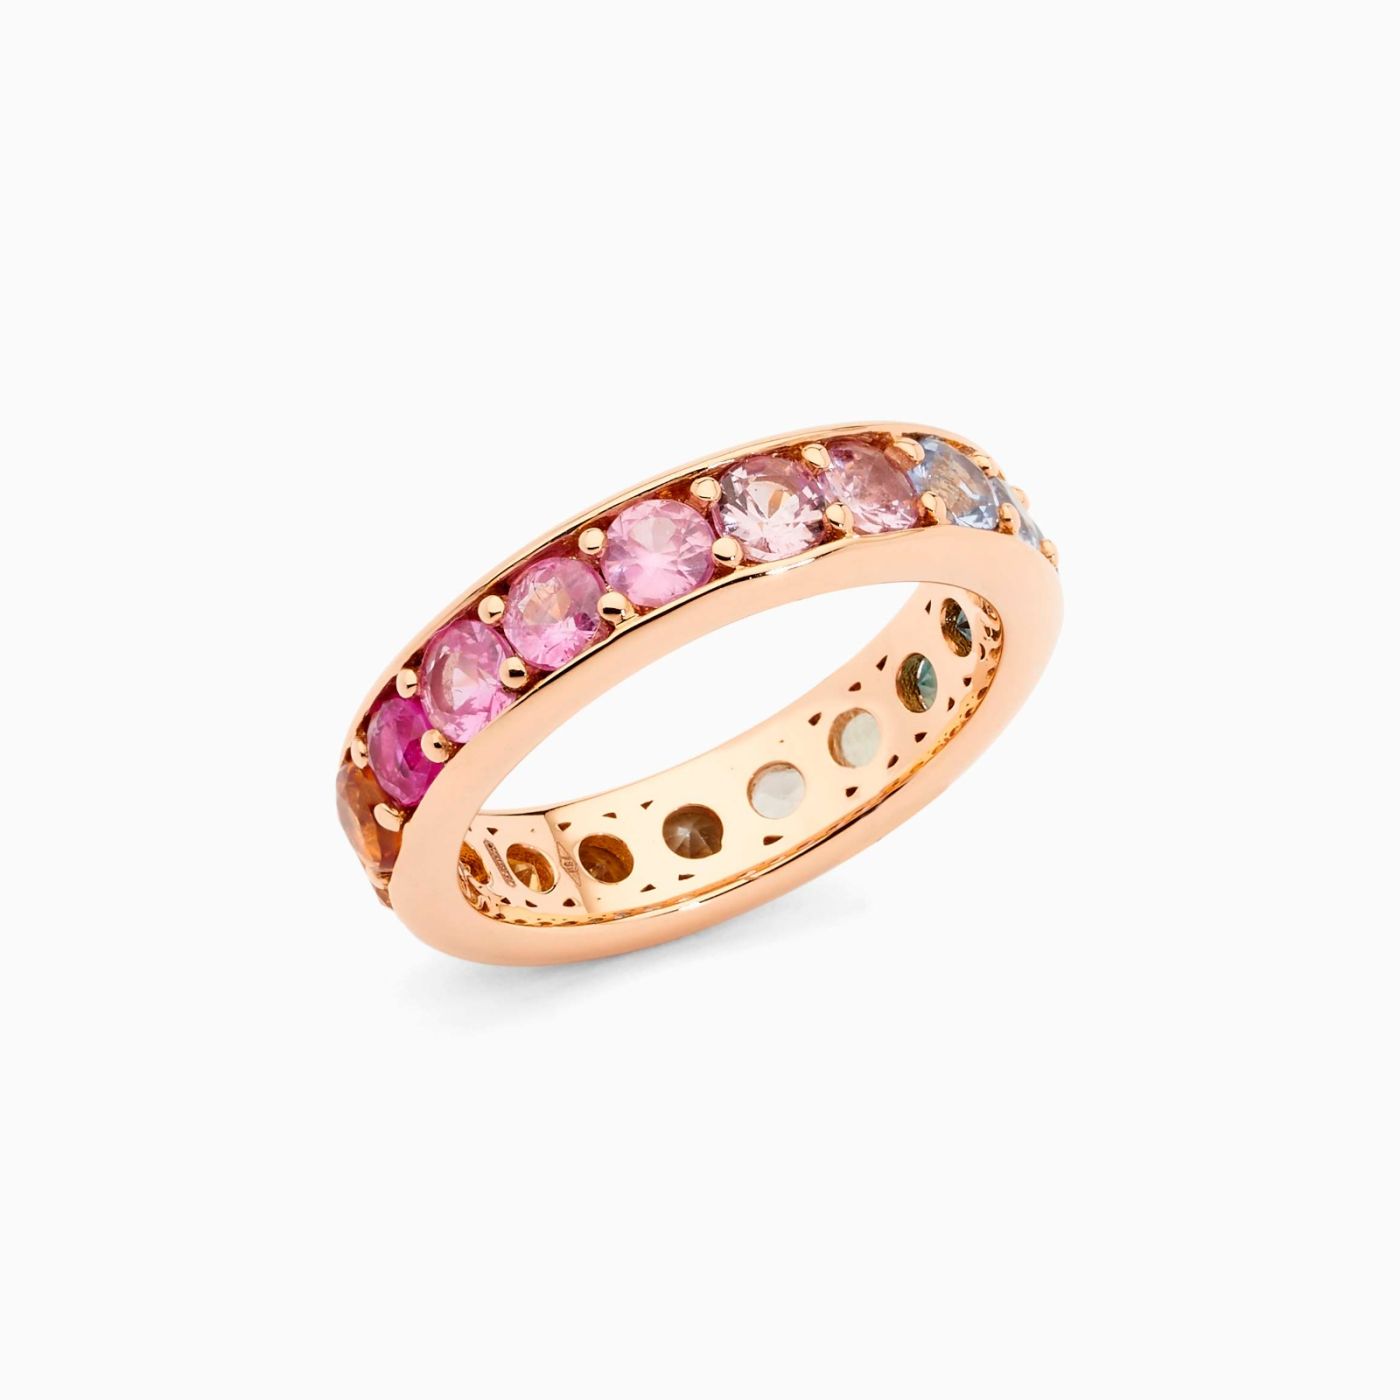 Rose gold rails wedding band ring with brilliant cut multicoloured sapphires